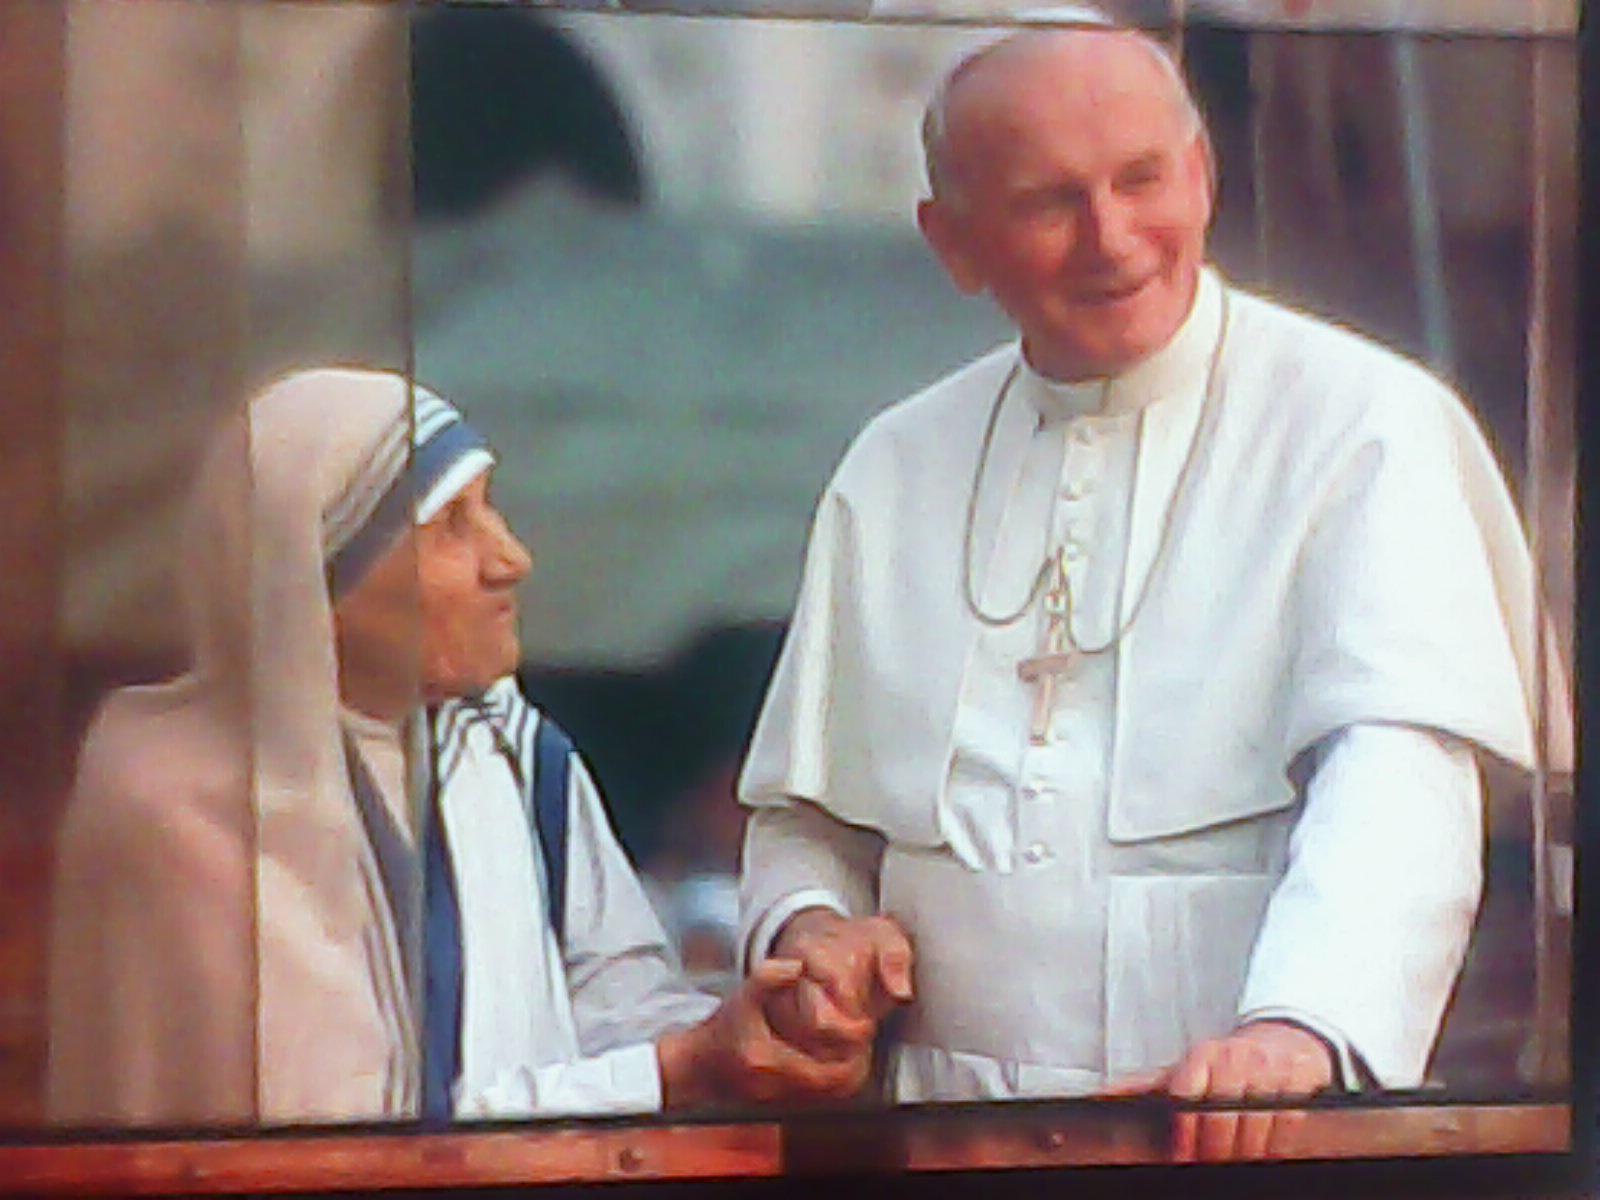 DNA Success: BEATUS, Embracing the holiness of Blessed John Paul II